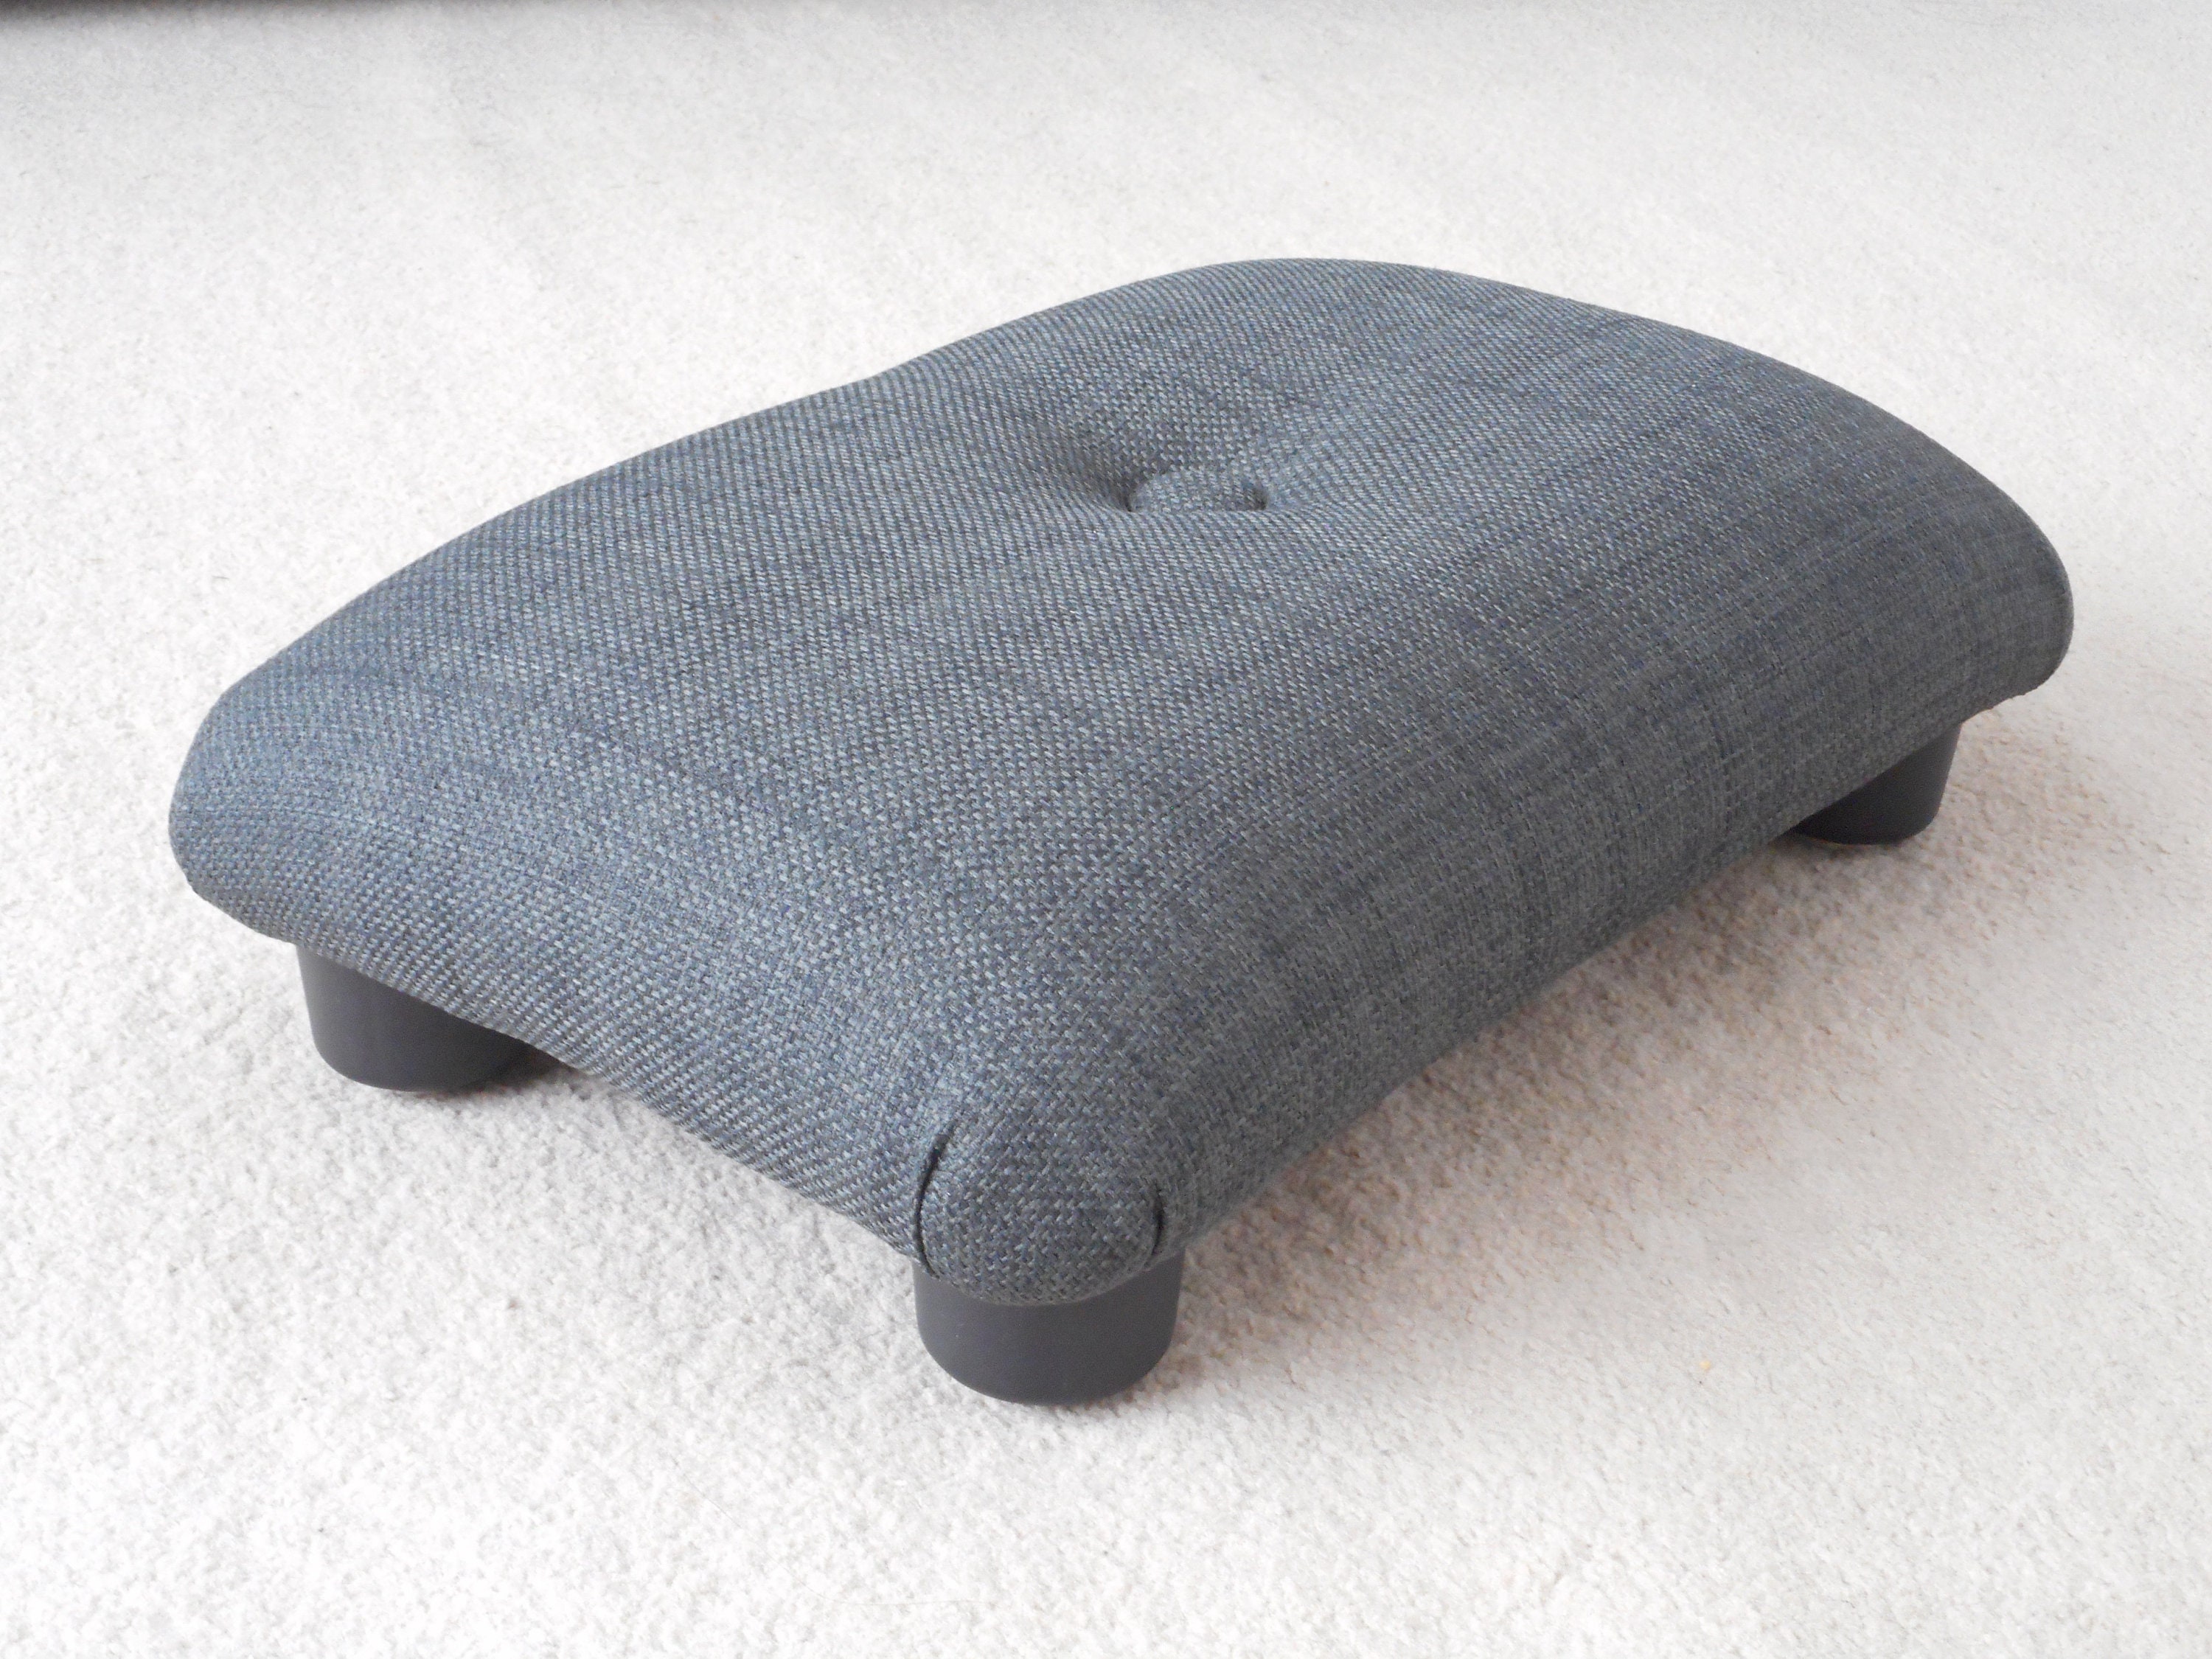 Small Under Desk Multicolor 9-10 Cm Height Footstool With Button